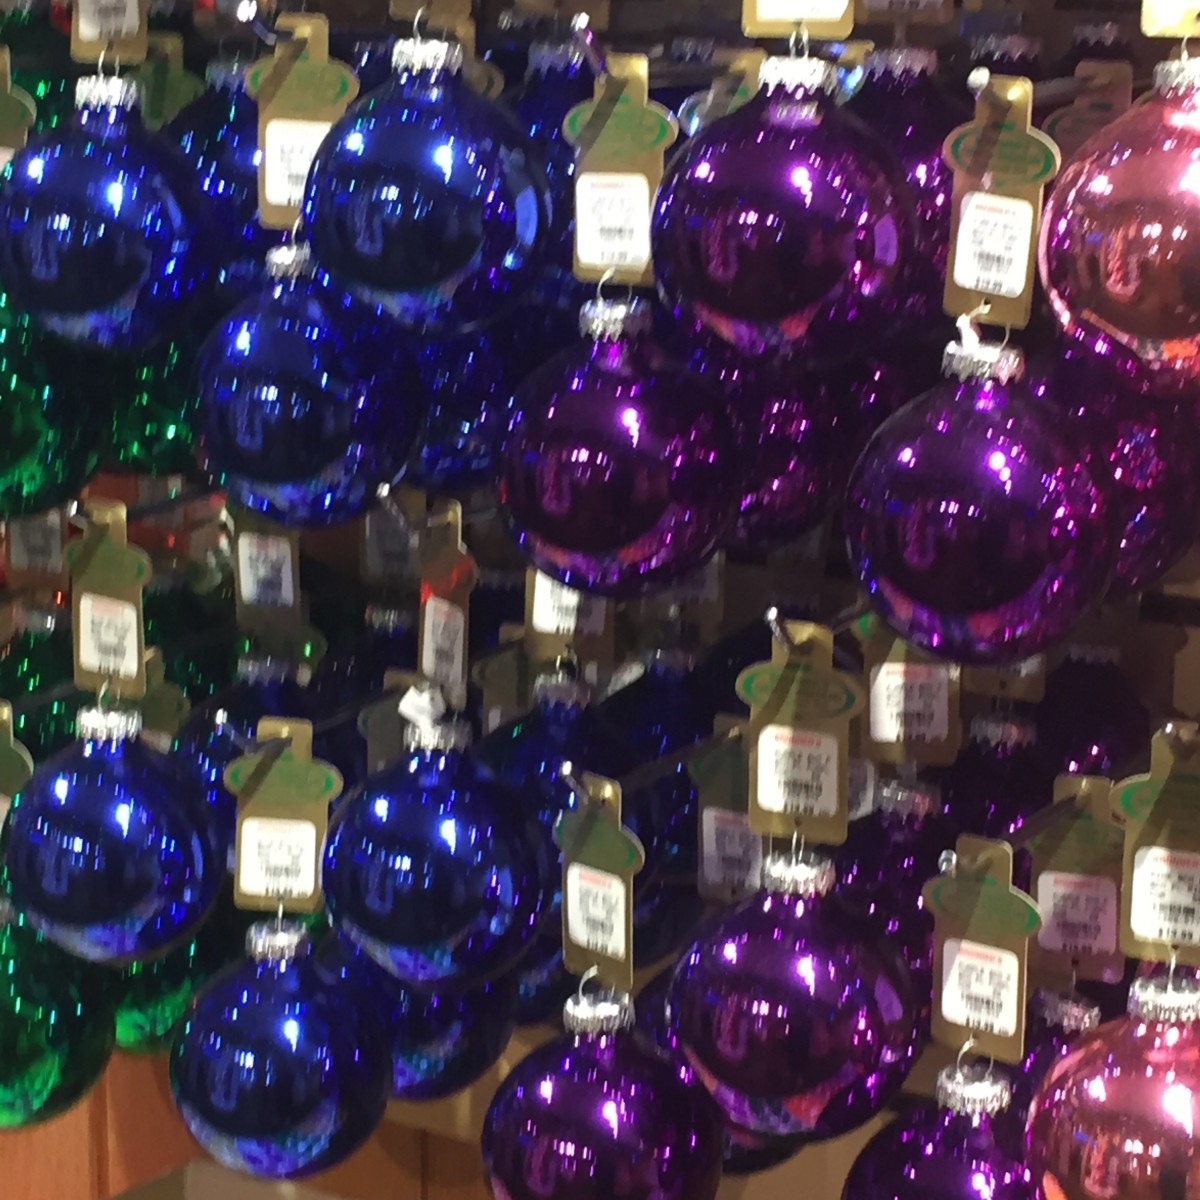 Something about Christmas tree ornaments. Particularly the traditional ball decorations. Especially when they have a glass or mirrored look to them.